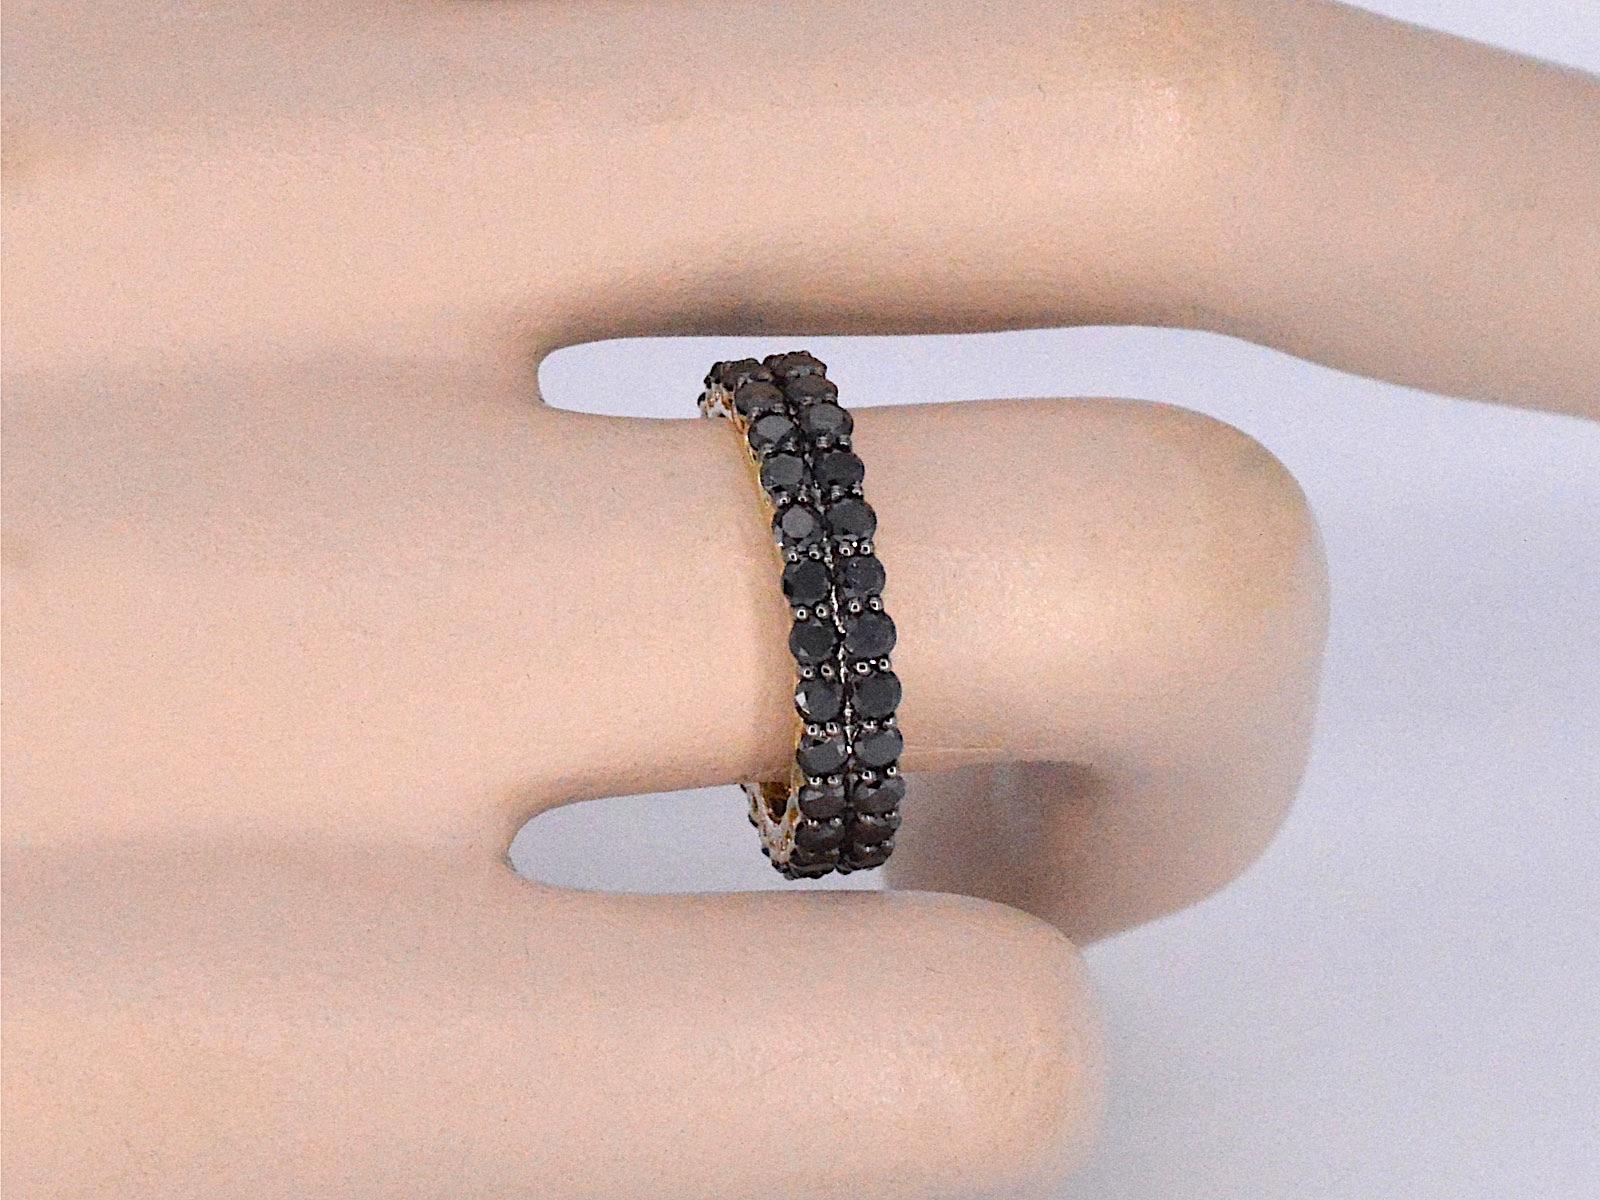 This gold eternity ring is a sleek and stylish piece of jewelry, featuring a band of black diamonds that wrap all the way around the ring. The gold is a high-quality metal that is known for its durability and lustrous properties. The black diamonds